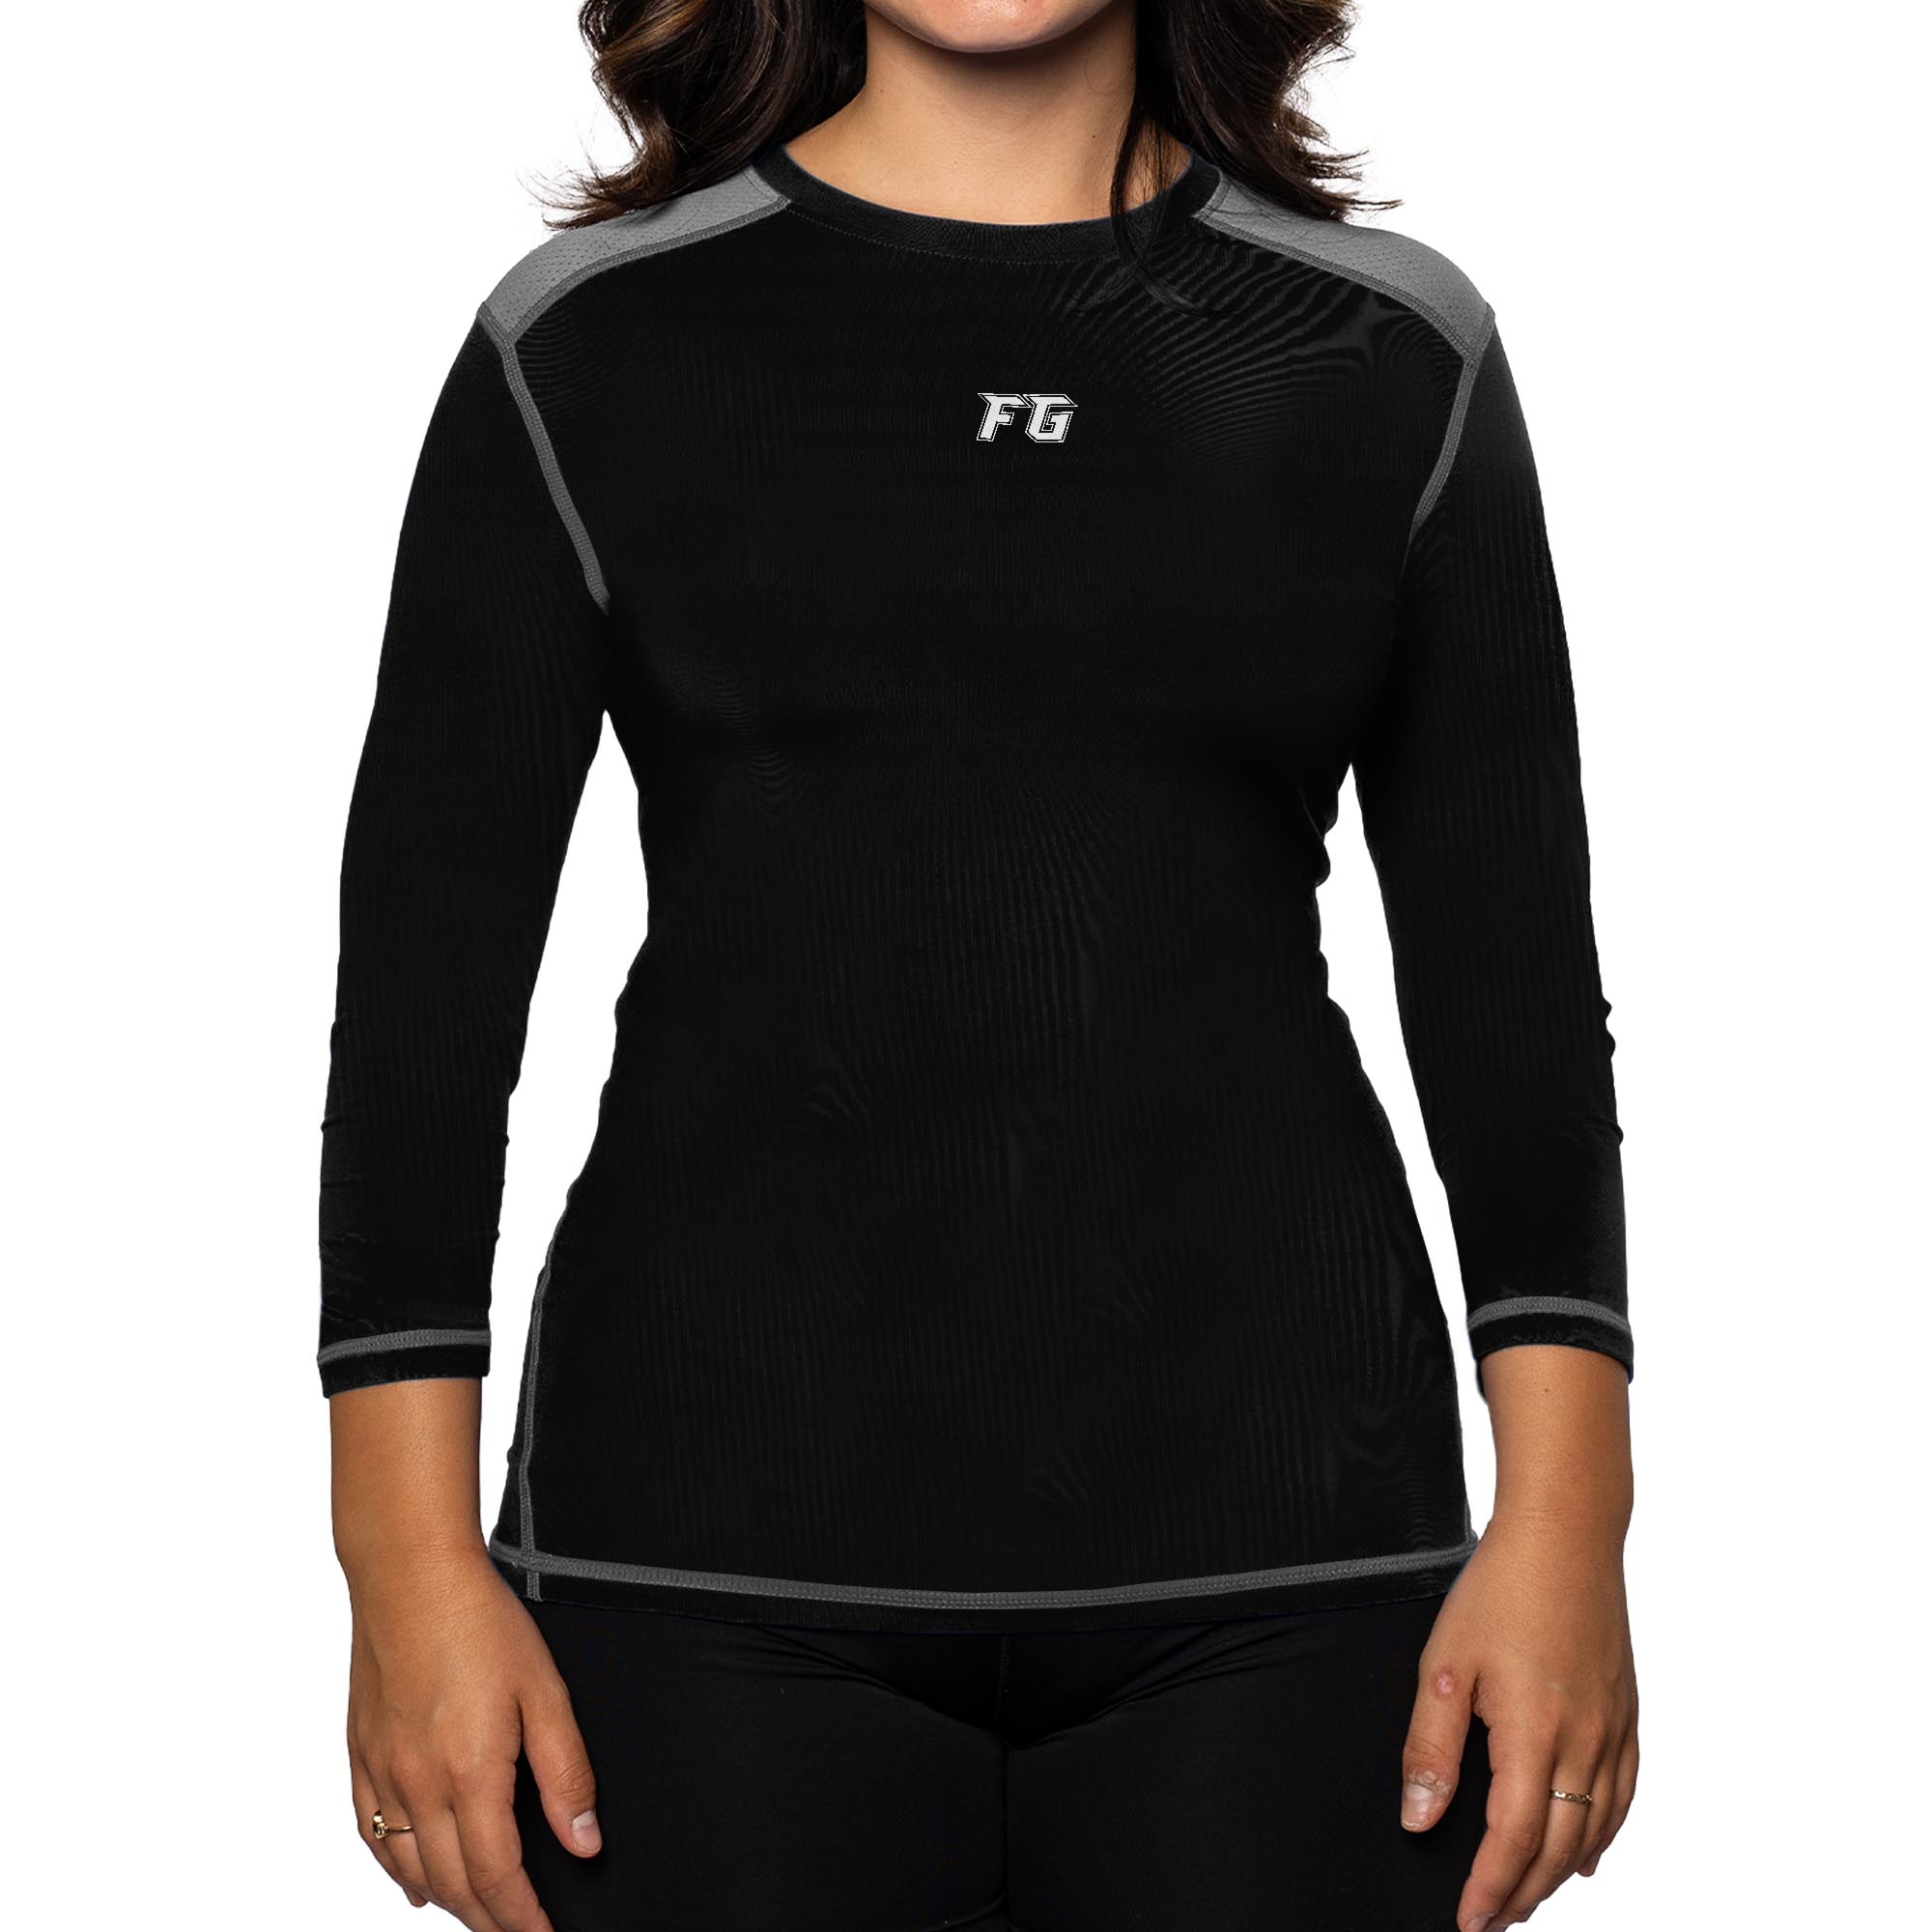 CombatX Summer 3/4 Compression Shirt - Adult Female - SPECIAL DEAL